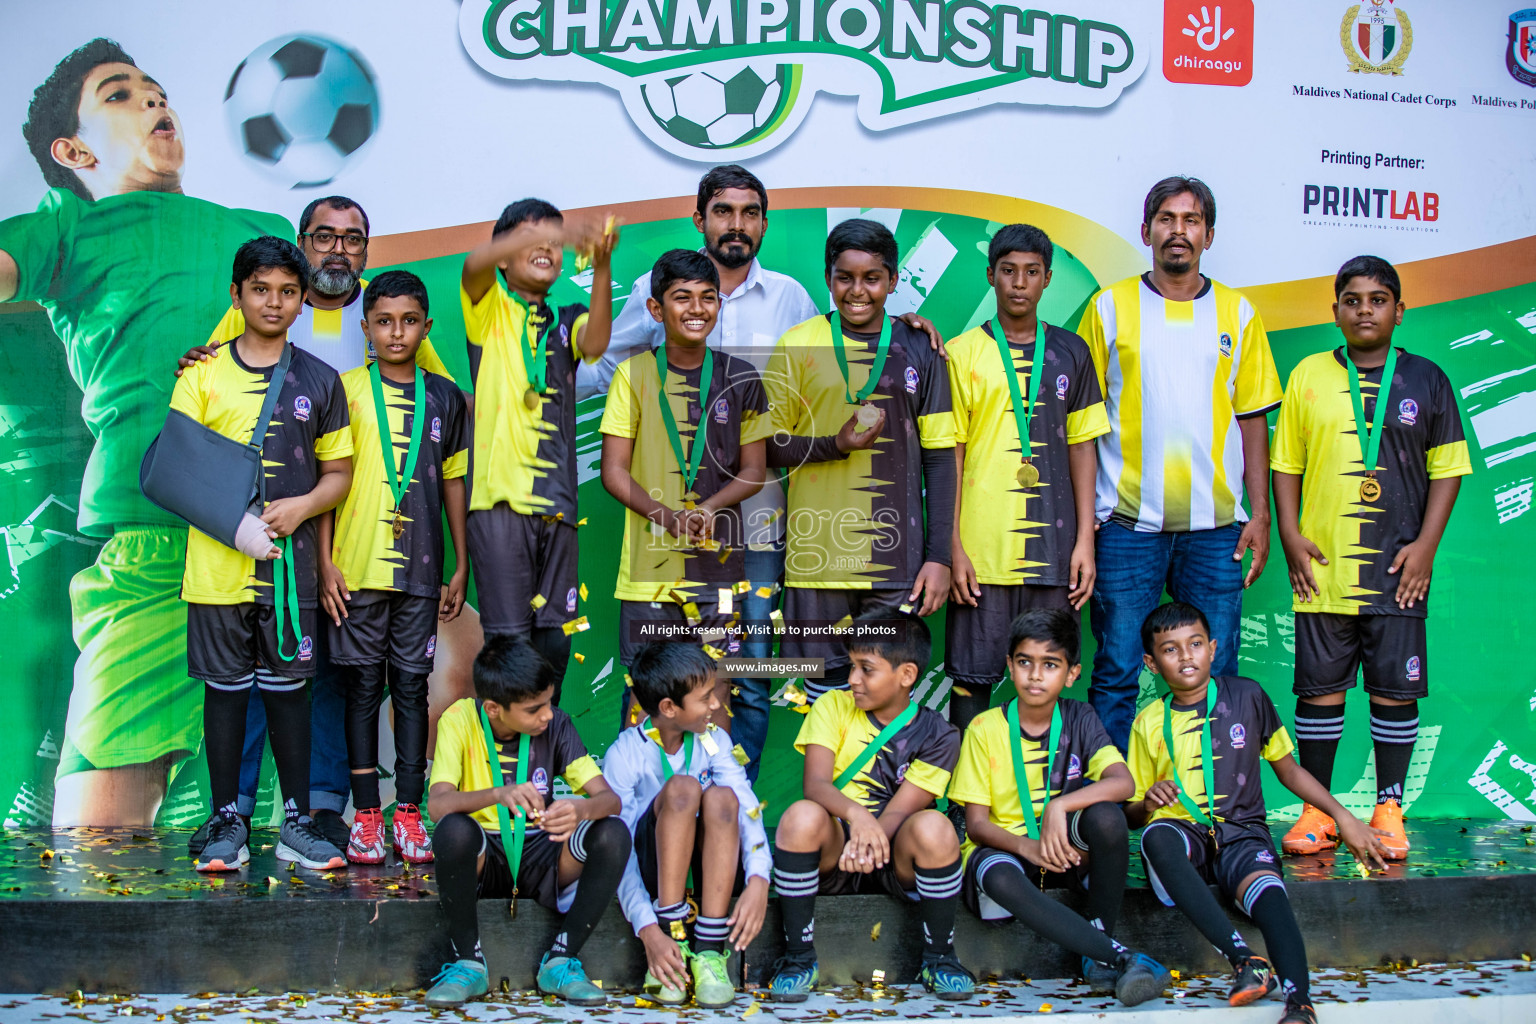 Day 2 of Milo Academy Championship (U12) was held in Male', Maldives on Saturday, 21st May 2022. Photos by: Nausham Waheed / images.mv